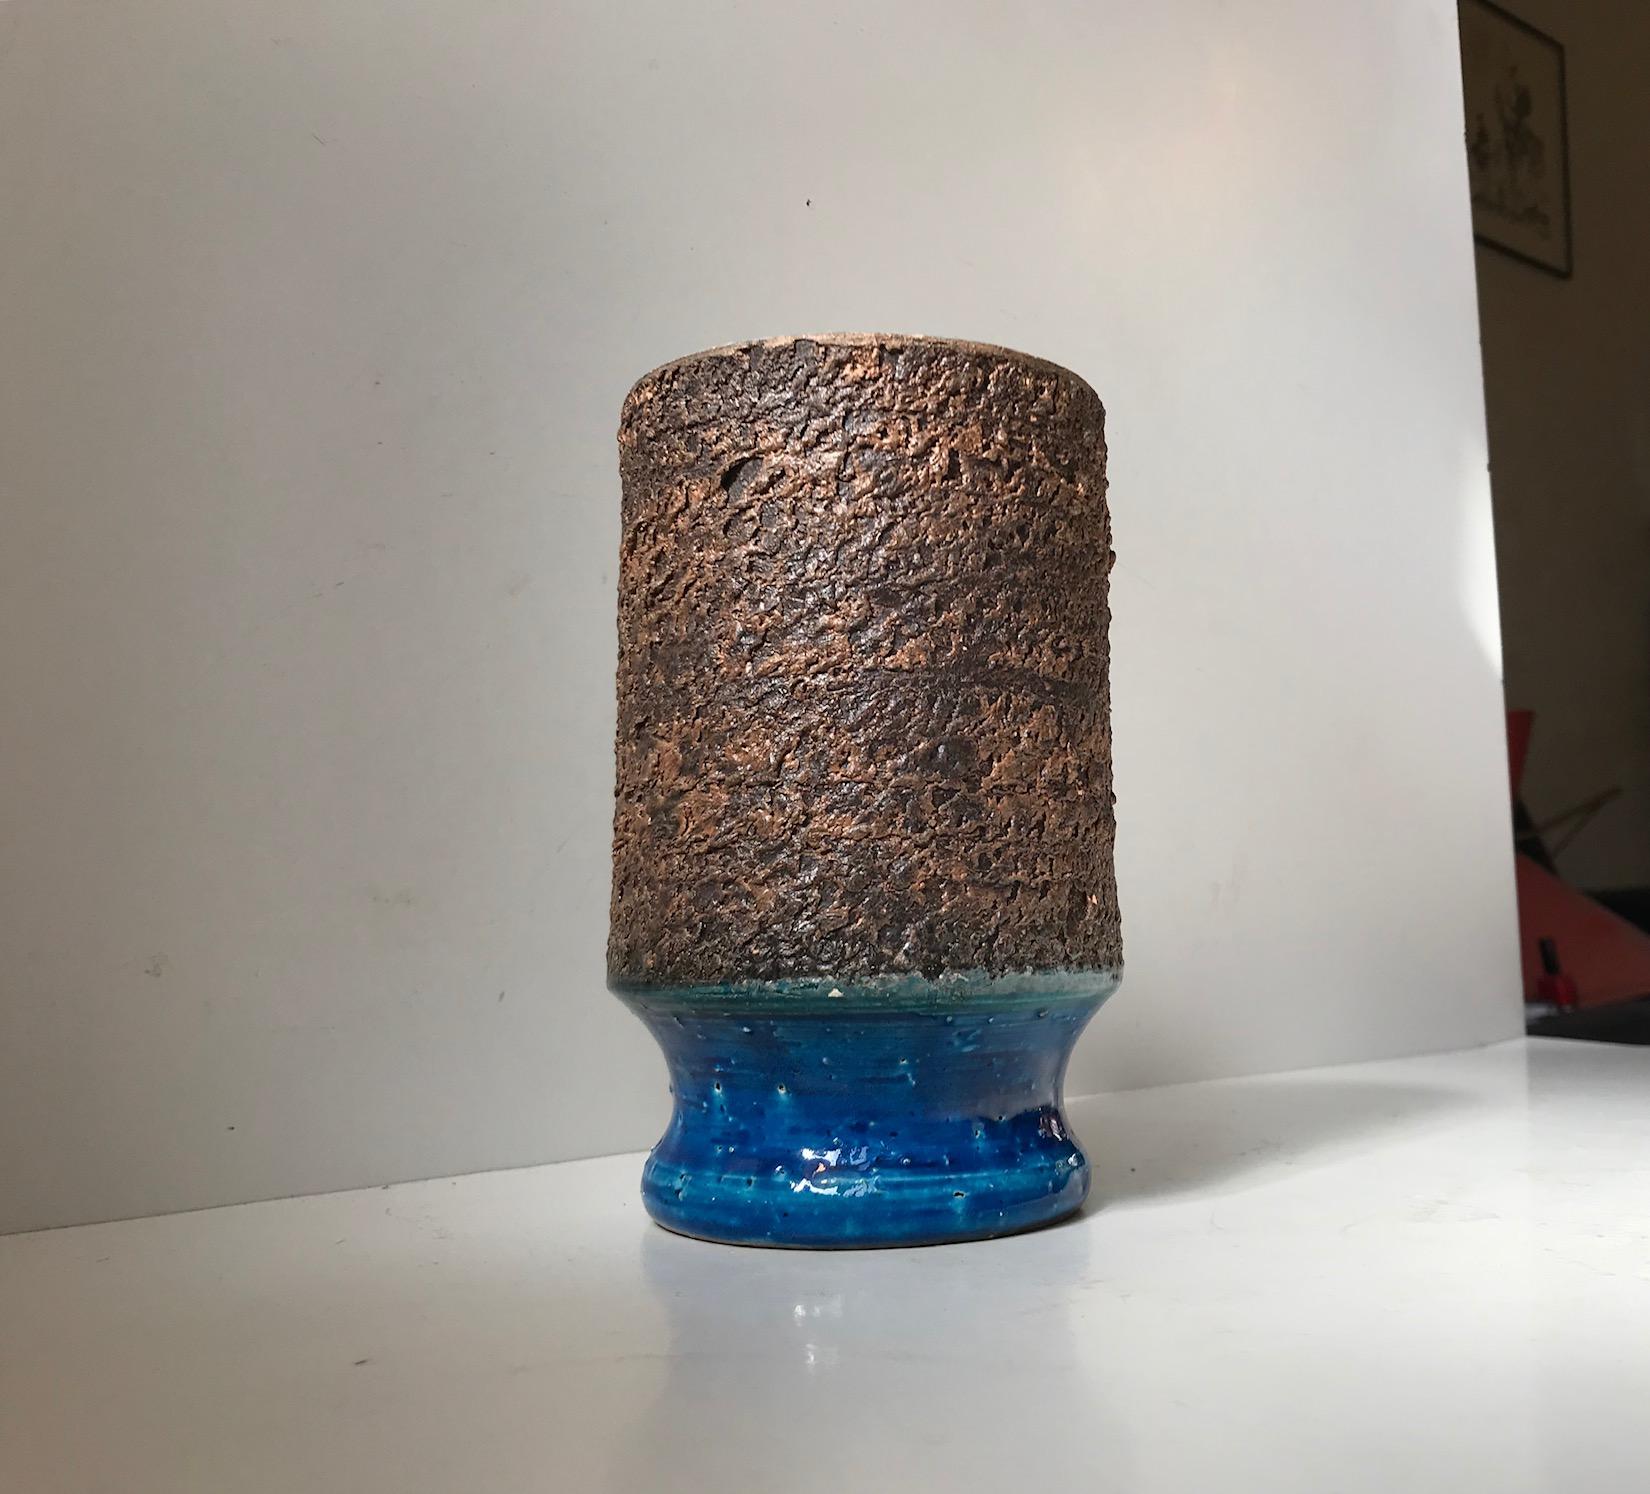 Aldo Londi designed this partially exposed stoneware vase with the characteristic Rimini blue glaze. It was manufactured in Italy by Bitossi during the 1960s.